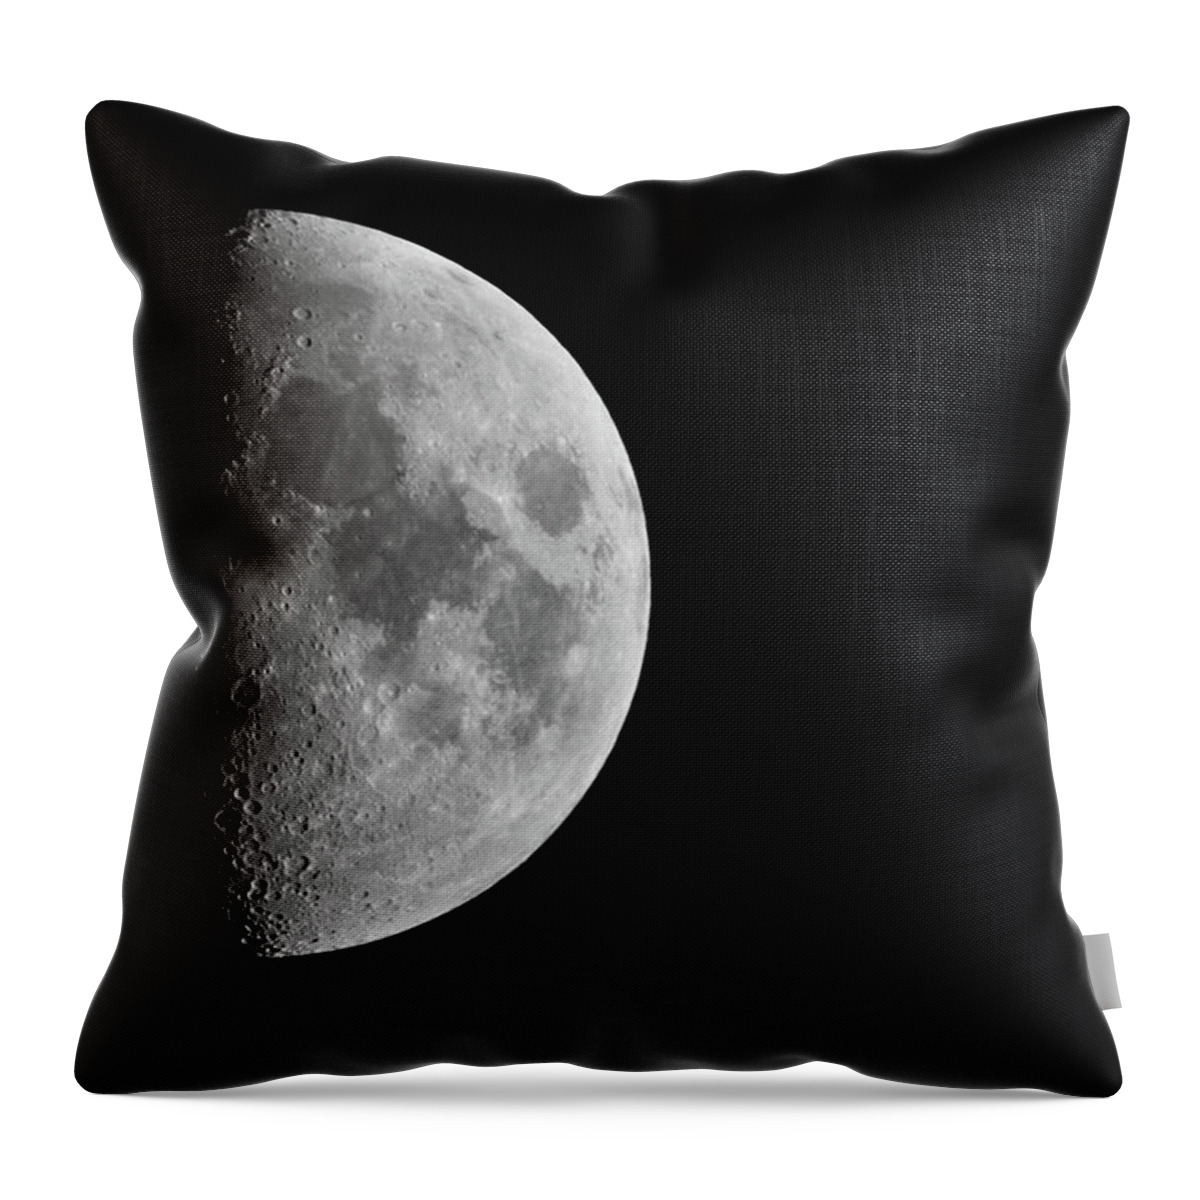 Newcastle-upon-tyne Throw Pillow featuring the photograph Moon by Dru Dodd/dru Dodd Photography